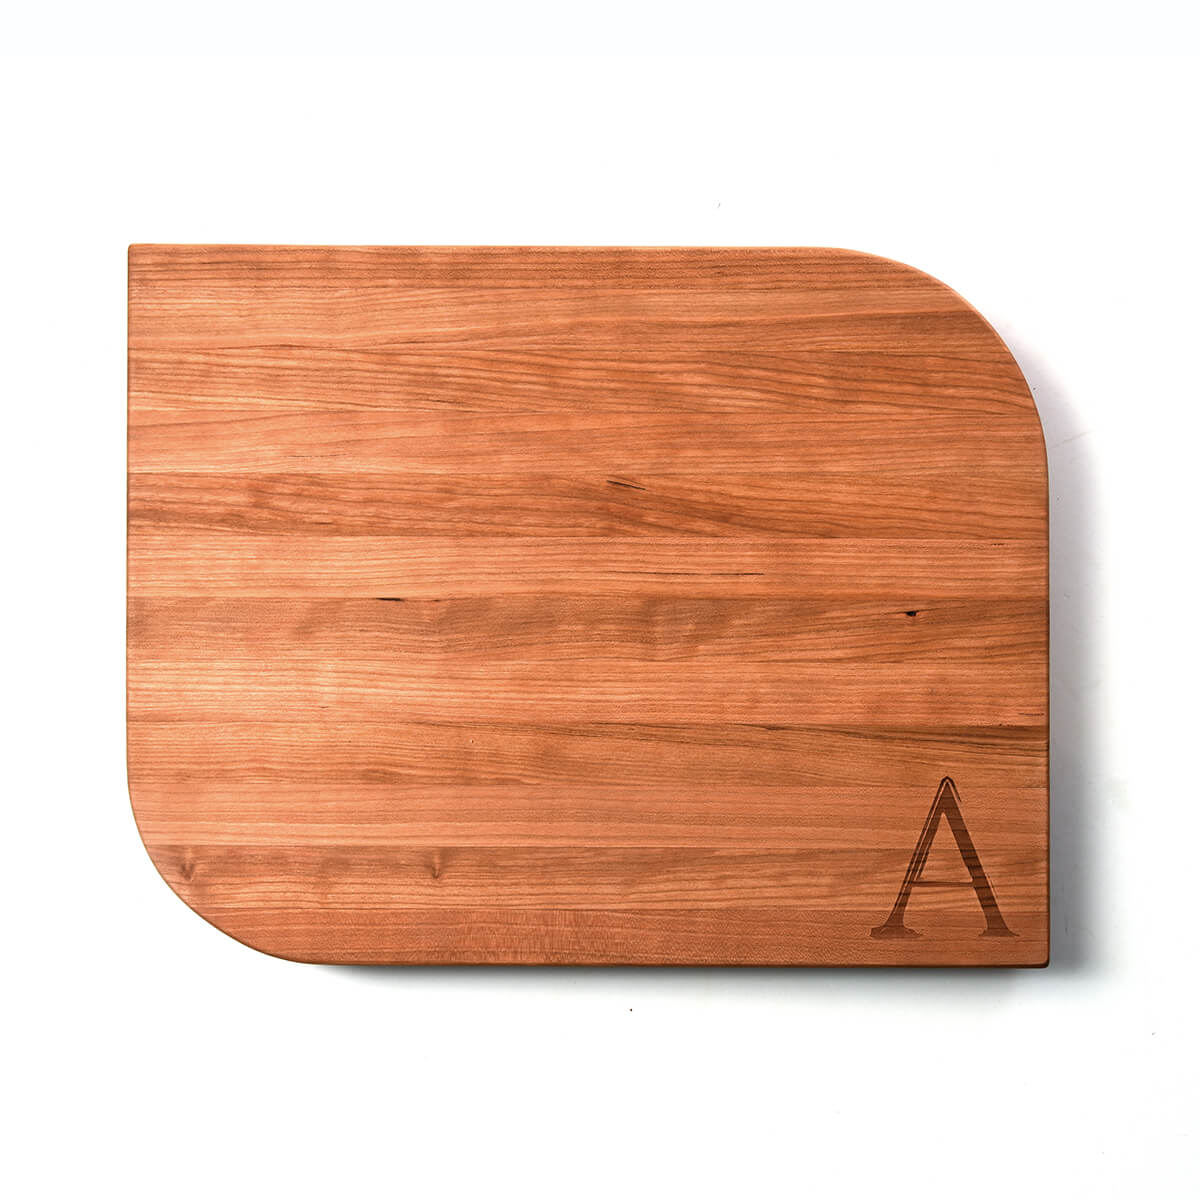 Celebrate Personalized Wooden Cutting Board – TheMemoryForge